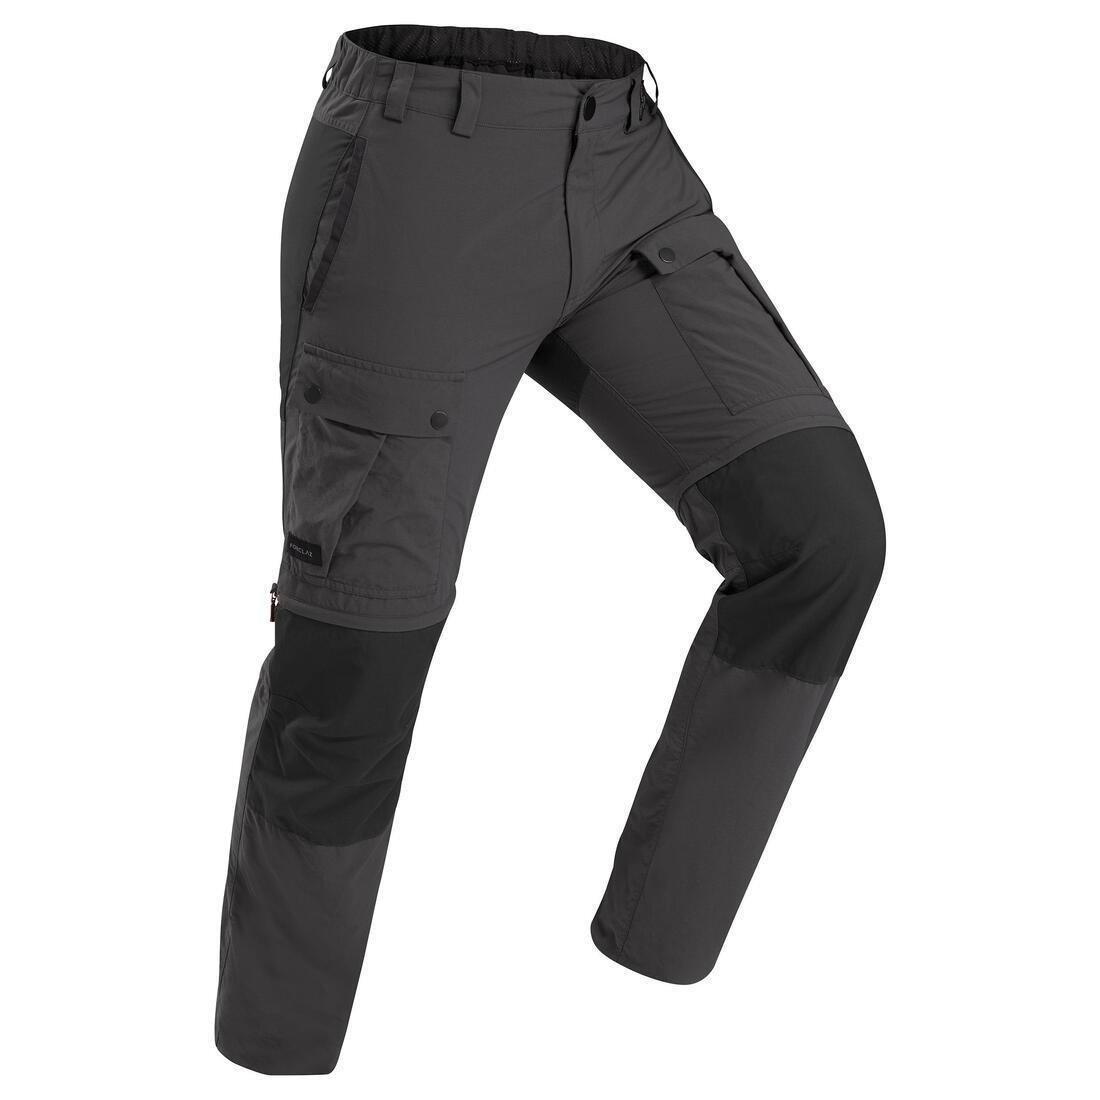 FORCLAZ - Mens Modular And Durable Mountain Trekking Trousers - Mt100, Grey